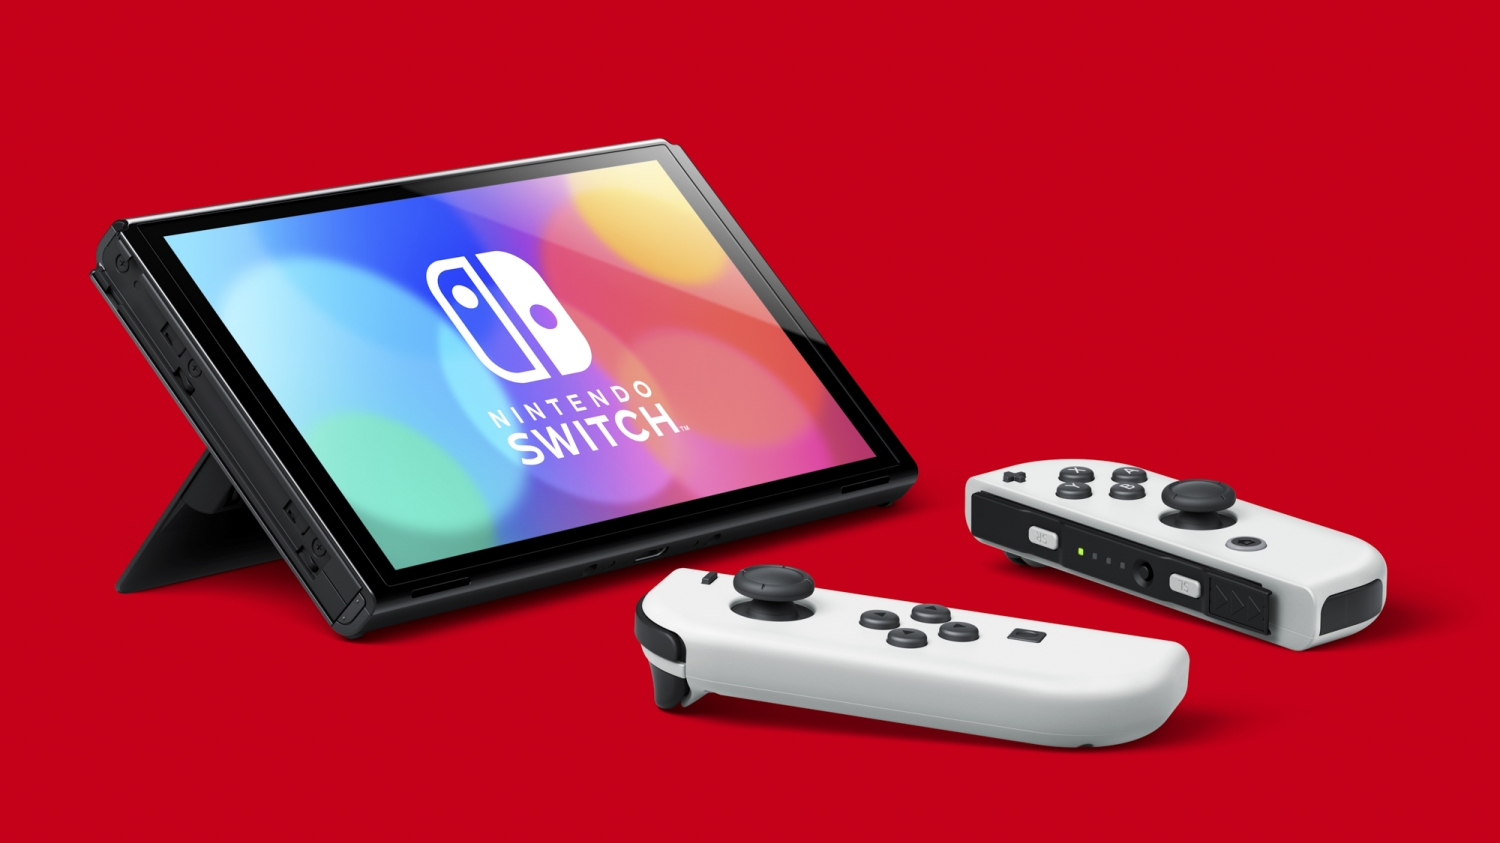 Nintendo FAQ Confirms That Switch OLED Joy-Cons Are The Same As